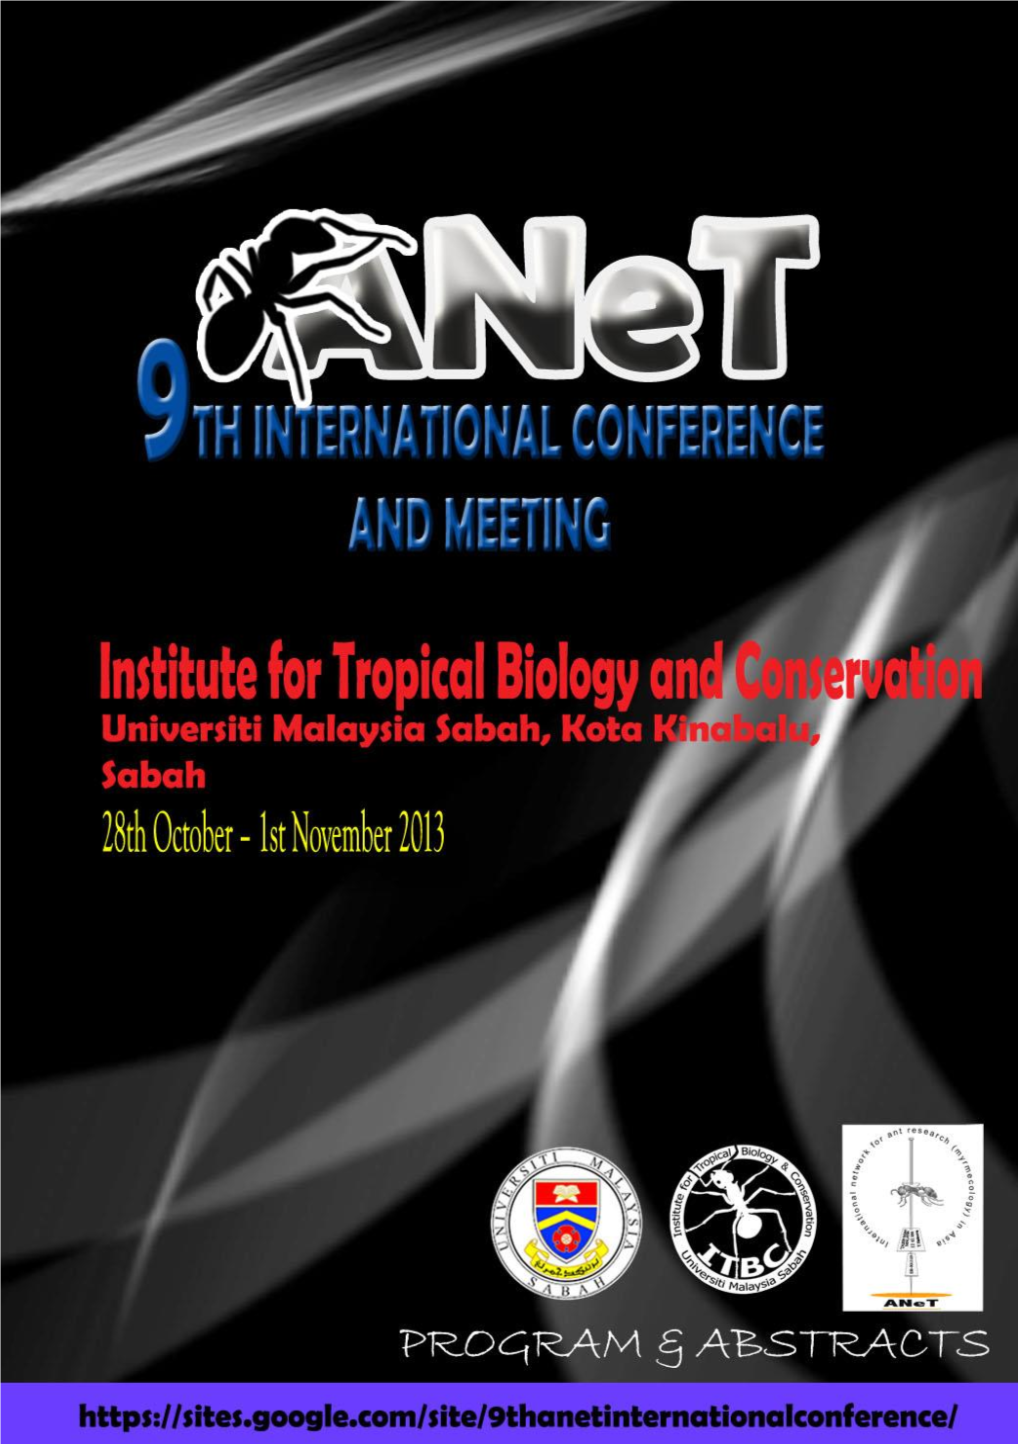 9Th International Conference and Meeting 28 Oct- 1 Nov 2013